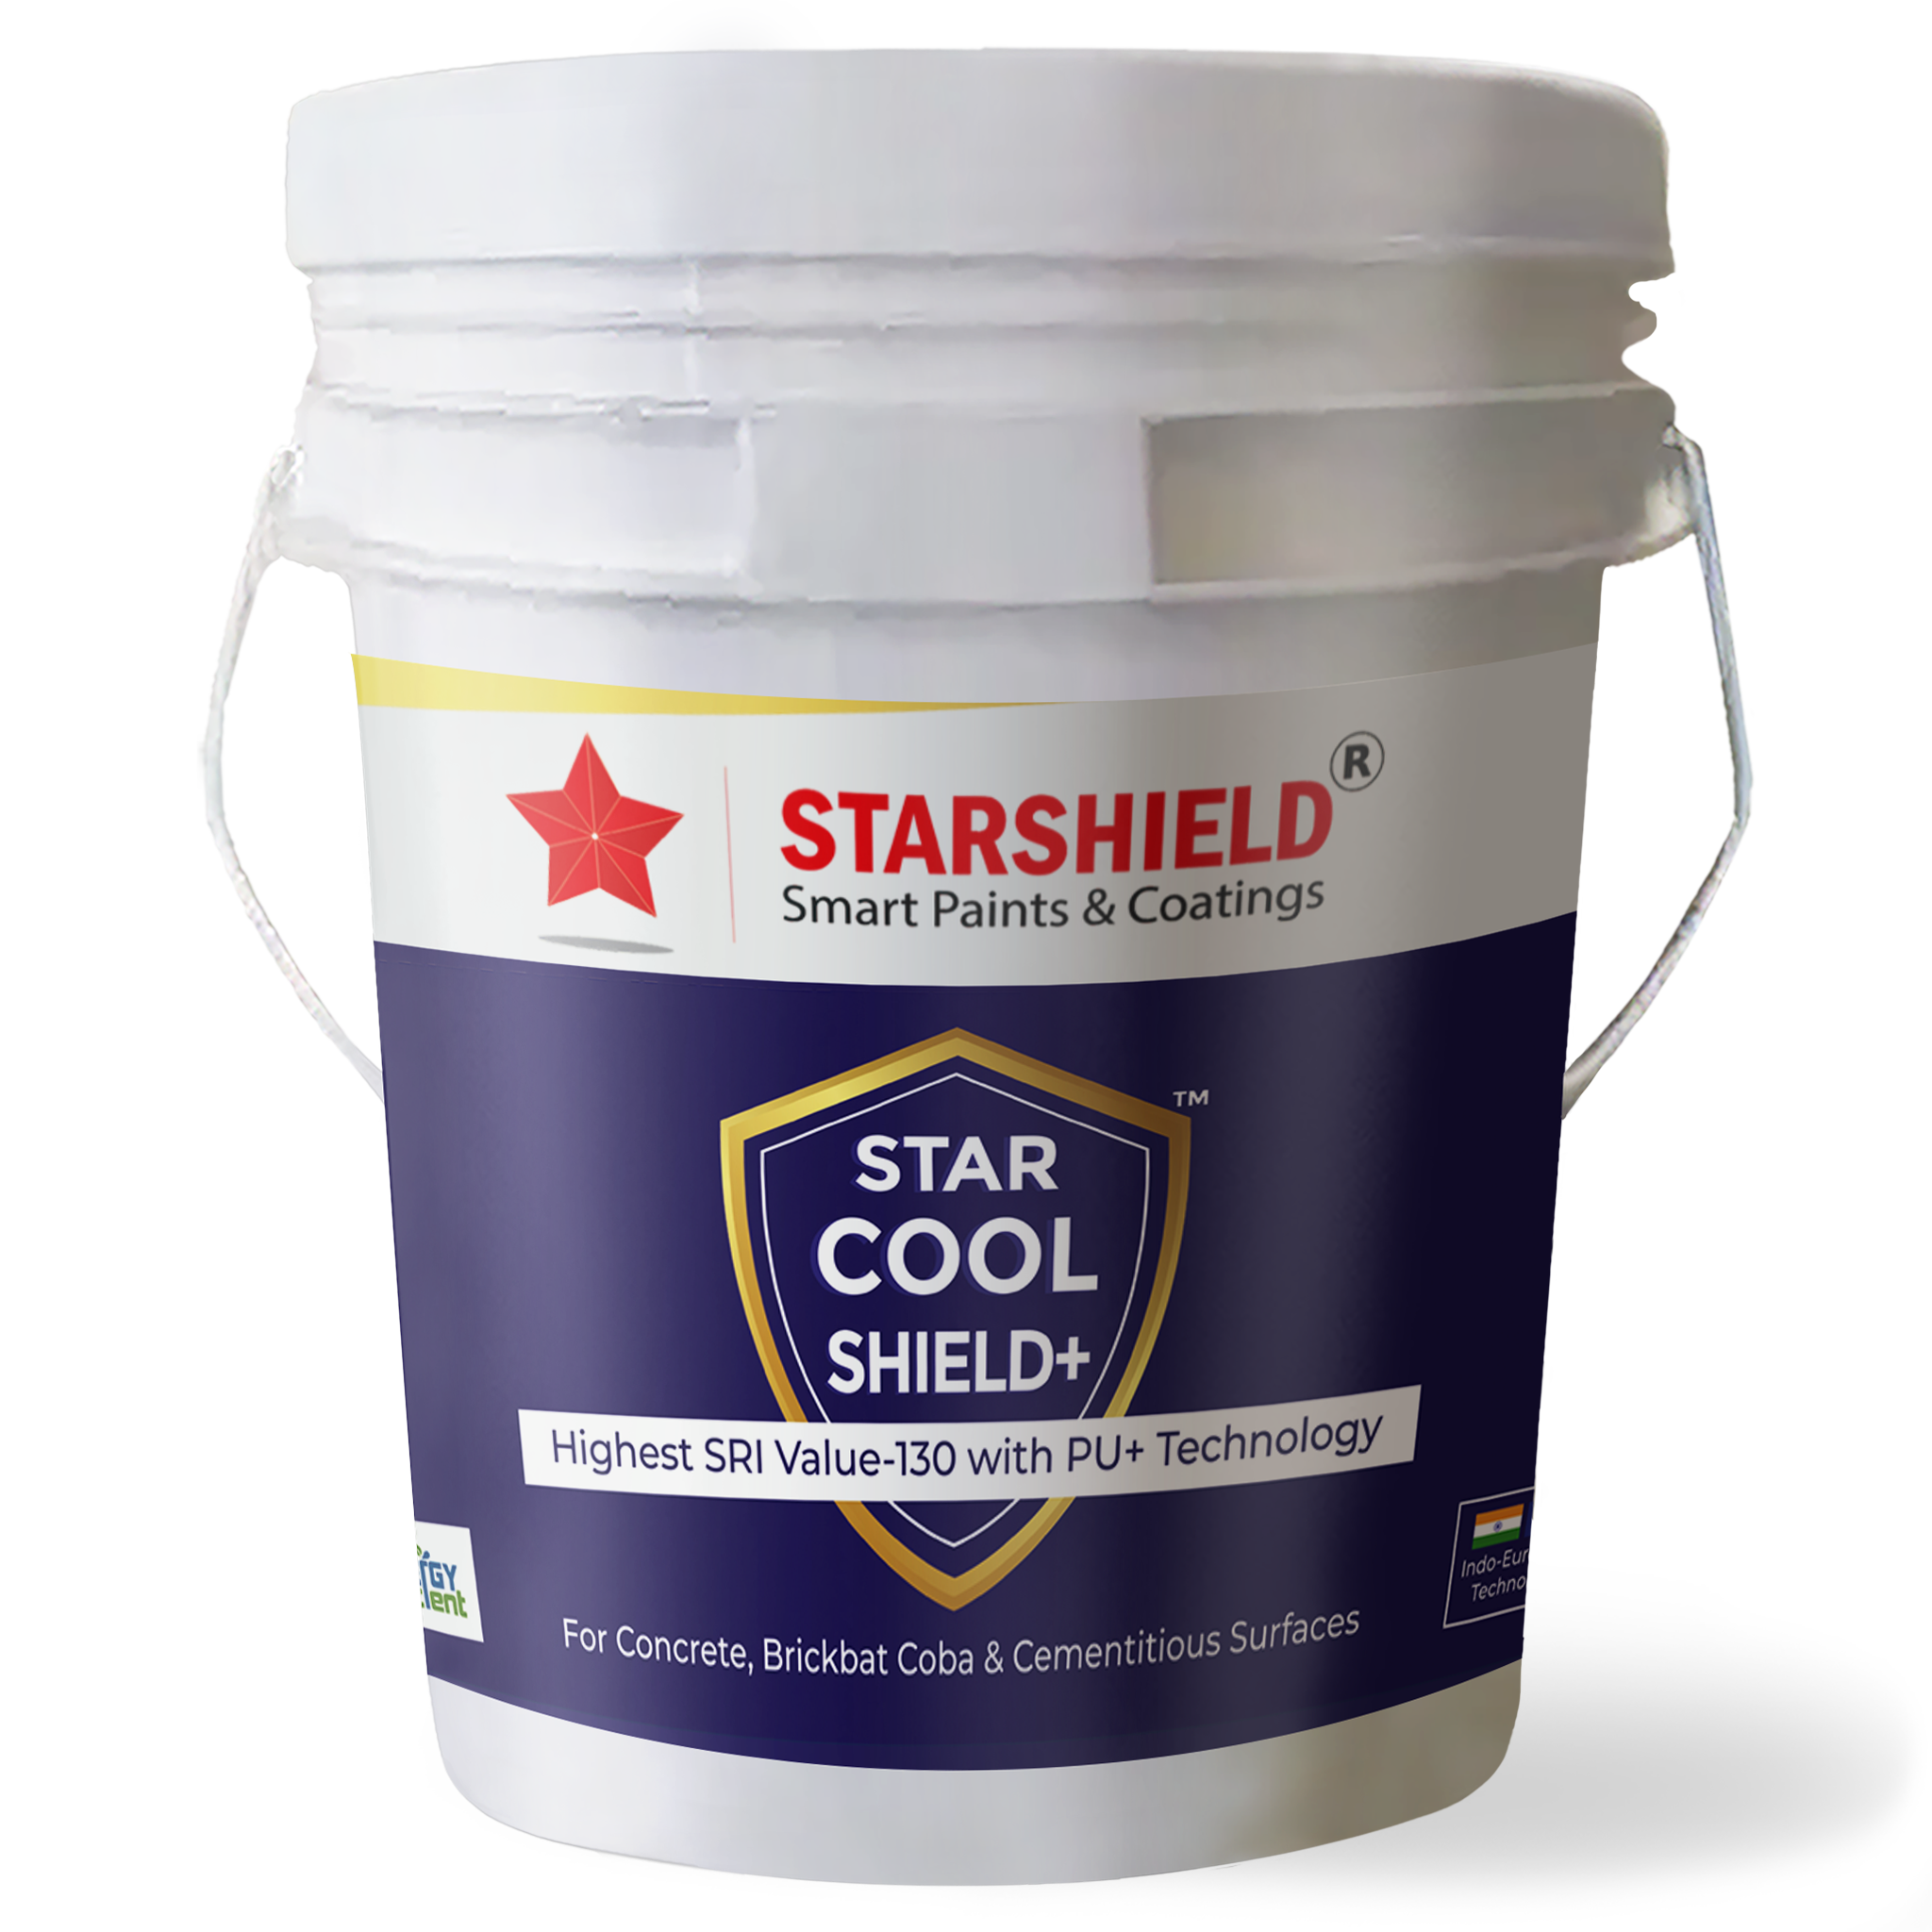 Protect your building with Star Cool Shield + Cool Roof Coating. Thermal Insulation, Solar Reflective.